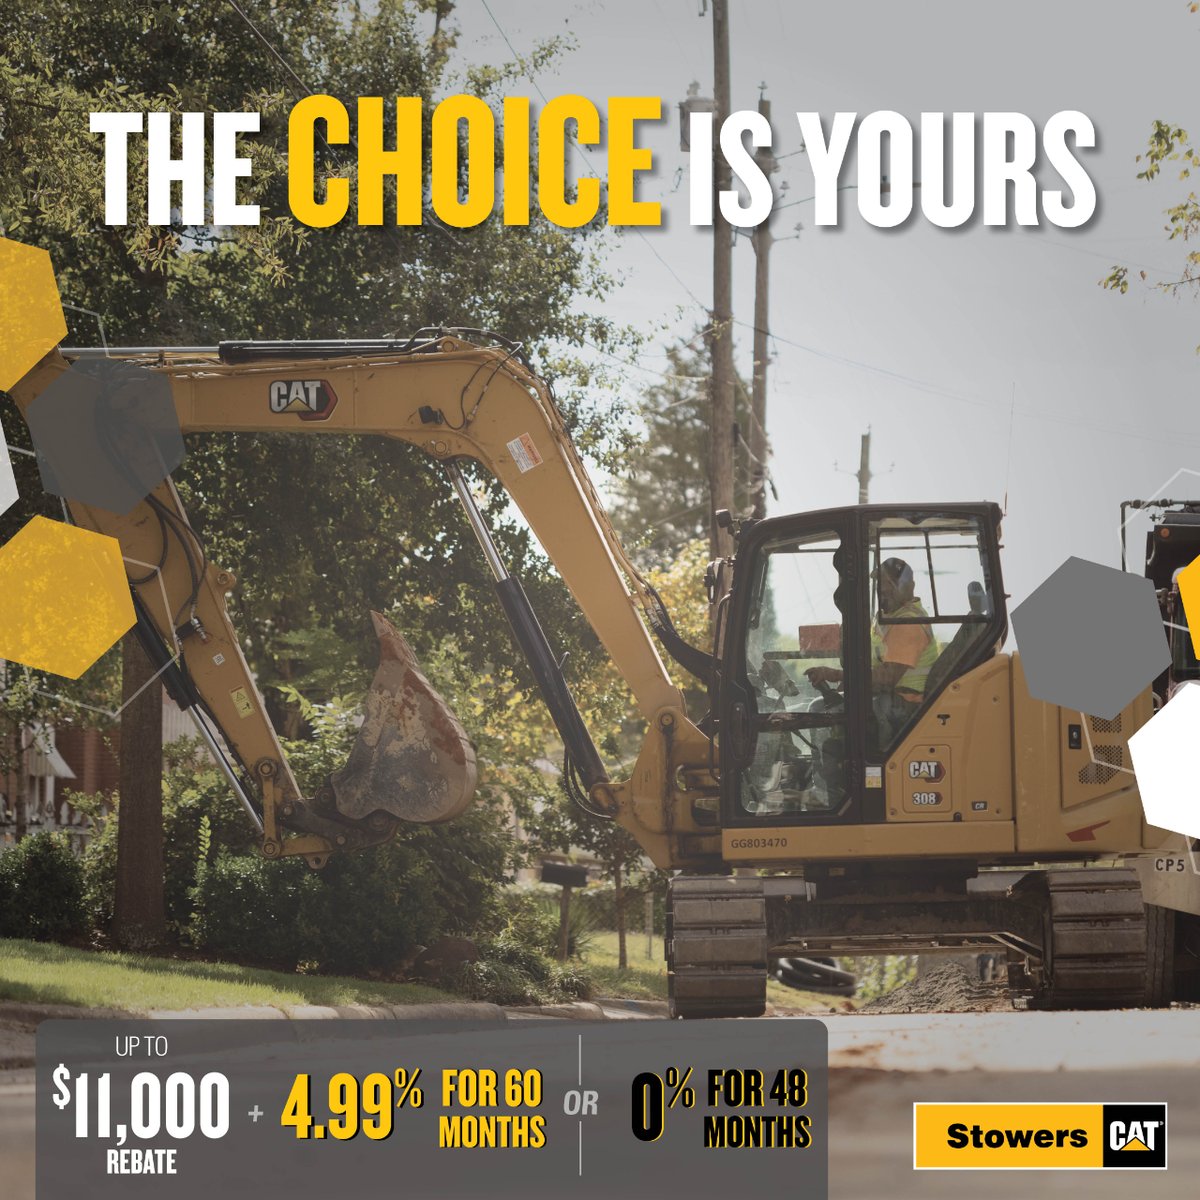 Cat compact construction equipment delivers power & performance. Take advantage of up to a $11,000 rebate & 4.99% for 60 months or 0% for 48 months when you purchase a piece of compact equipment. The #ChoiceIsYours! bit.ly/3v3c1gC

#StowersCat